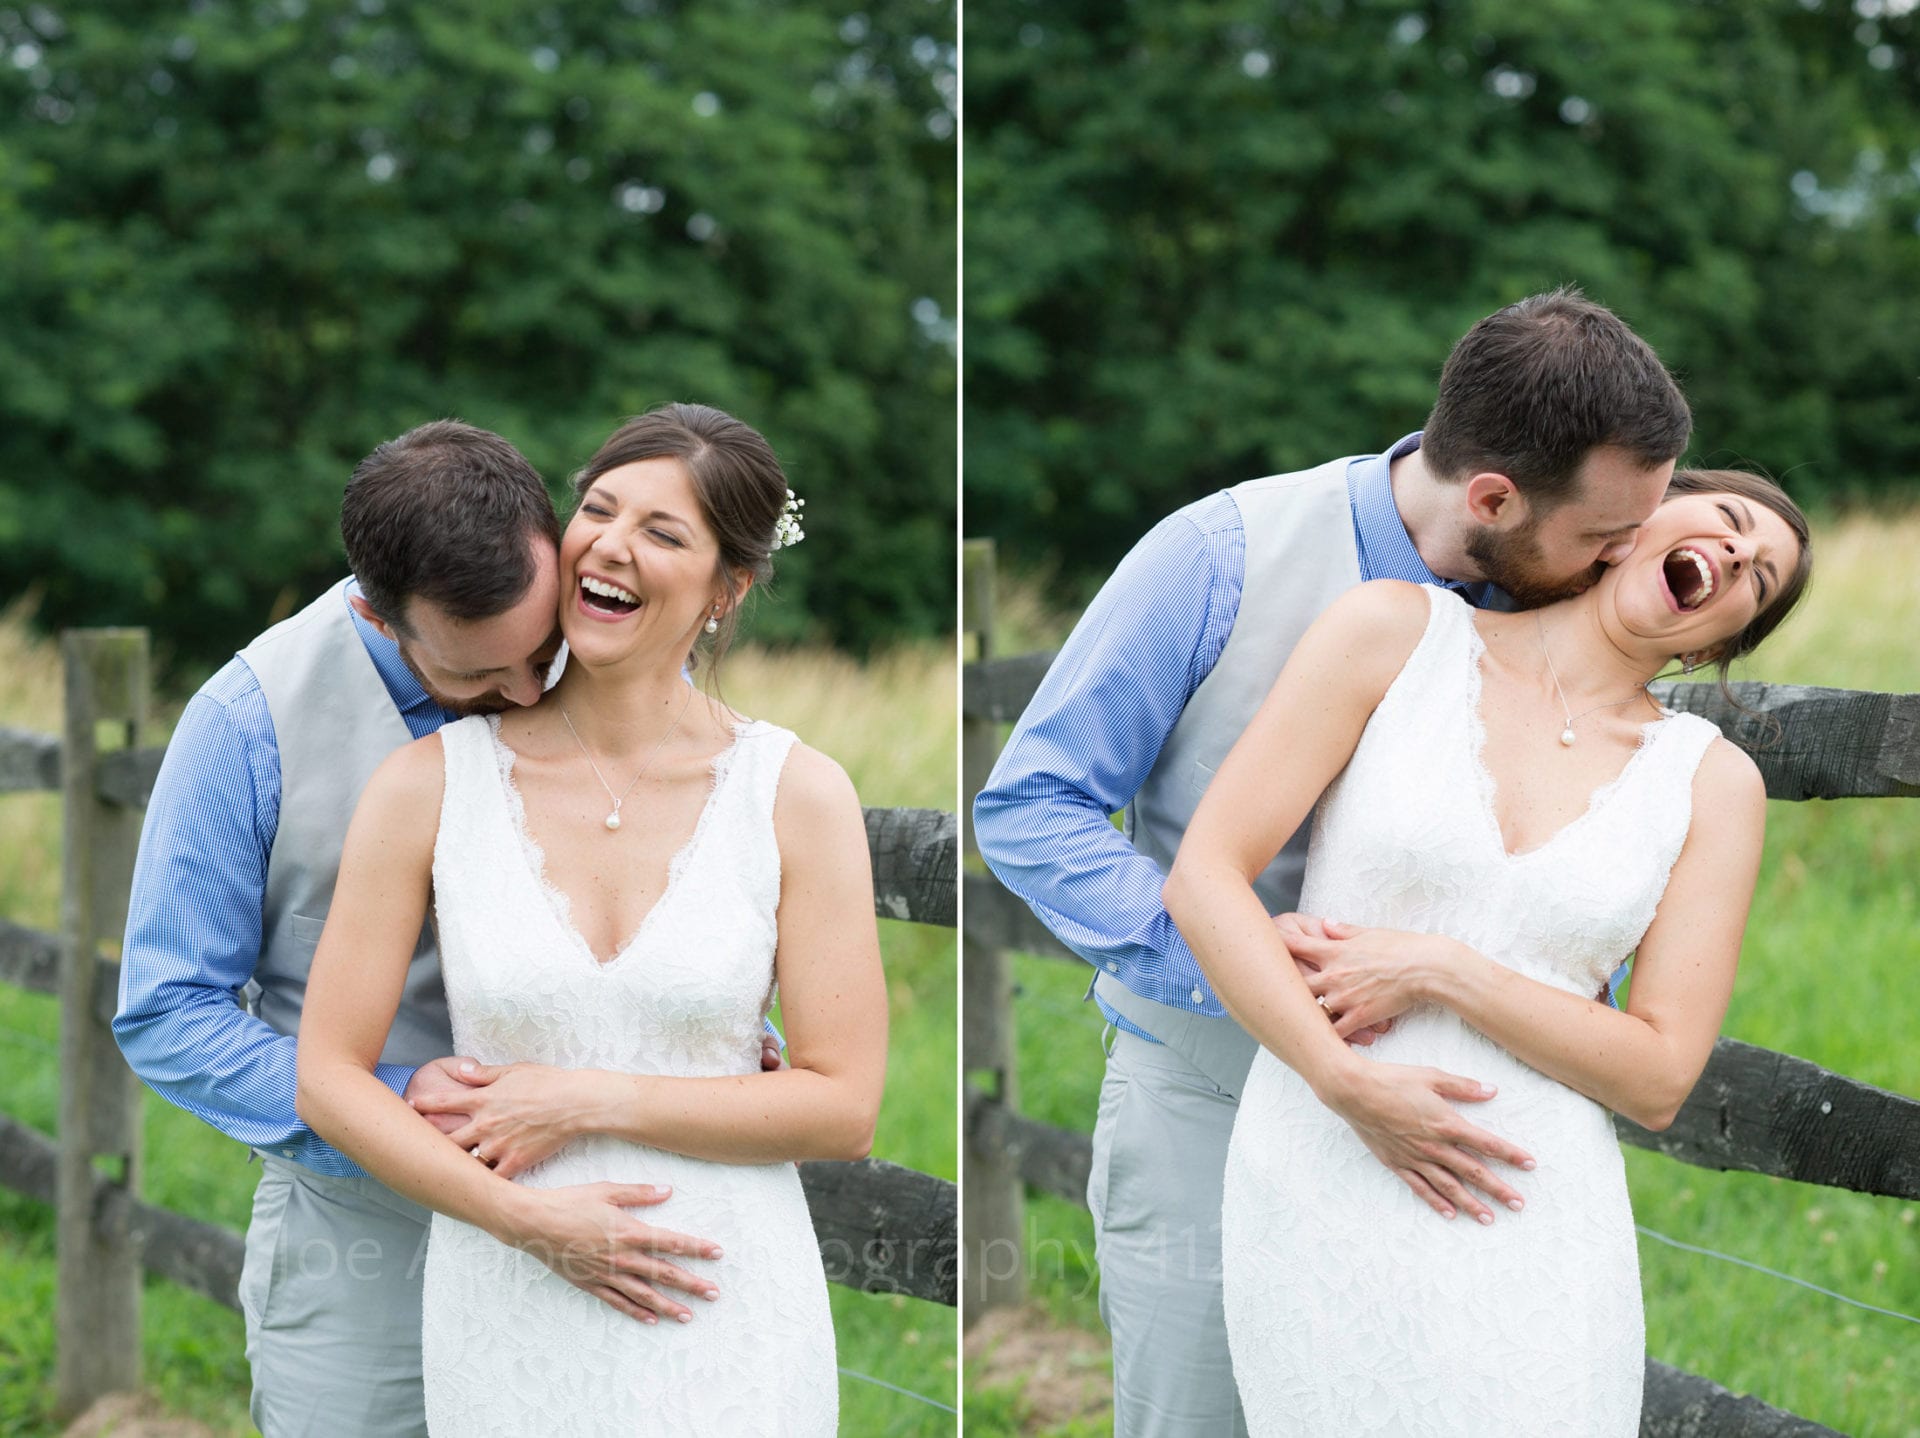 two photos: a groom wearing a tan vest and a blue shirt stands behind his bride who is wearing a white dress with straps and a plunging neckline. He kisses her on the neck as she laughs. The second photo shows more of the same but the bride is bending further to the right and laughing louder during their Armstrong Farms Wedding.